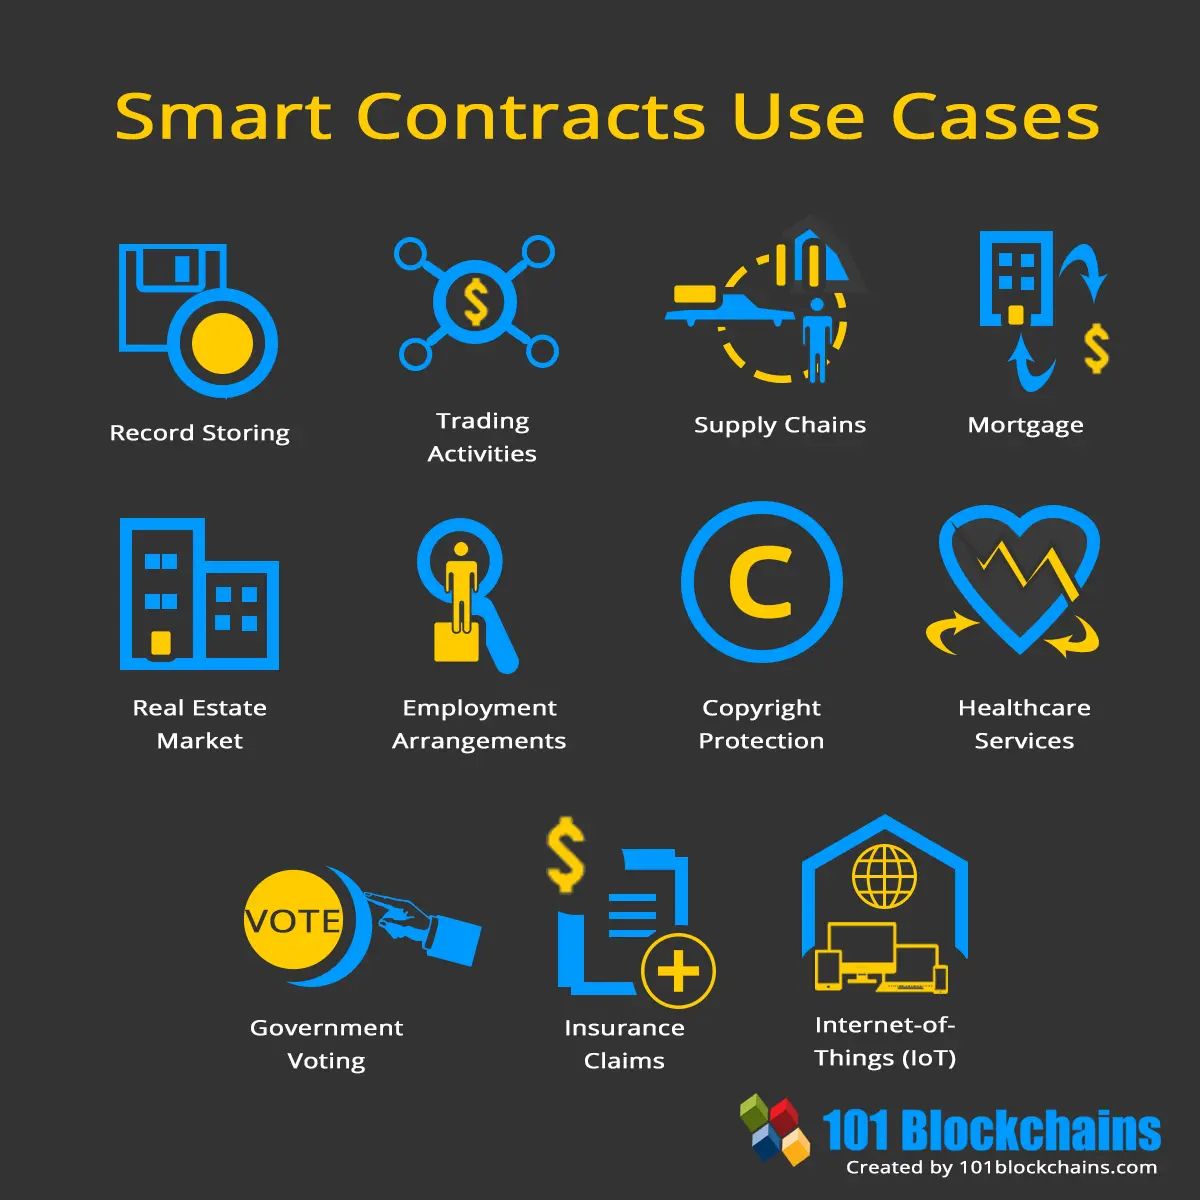 Smart Contracts Use Cases